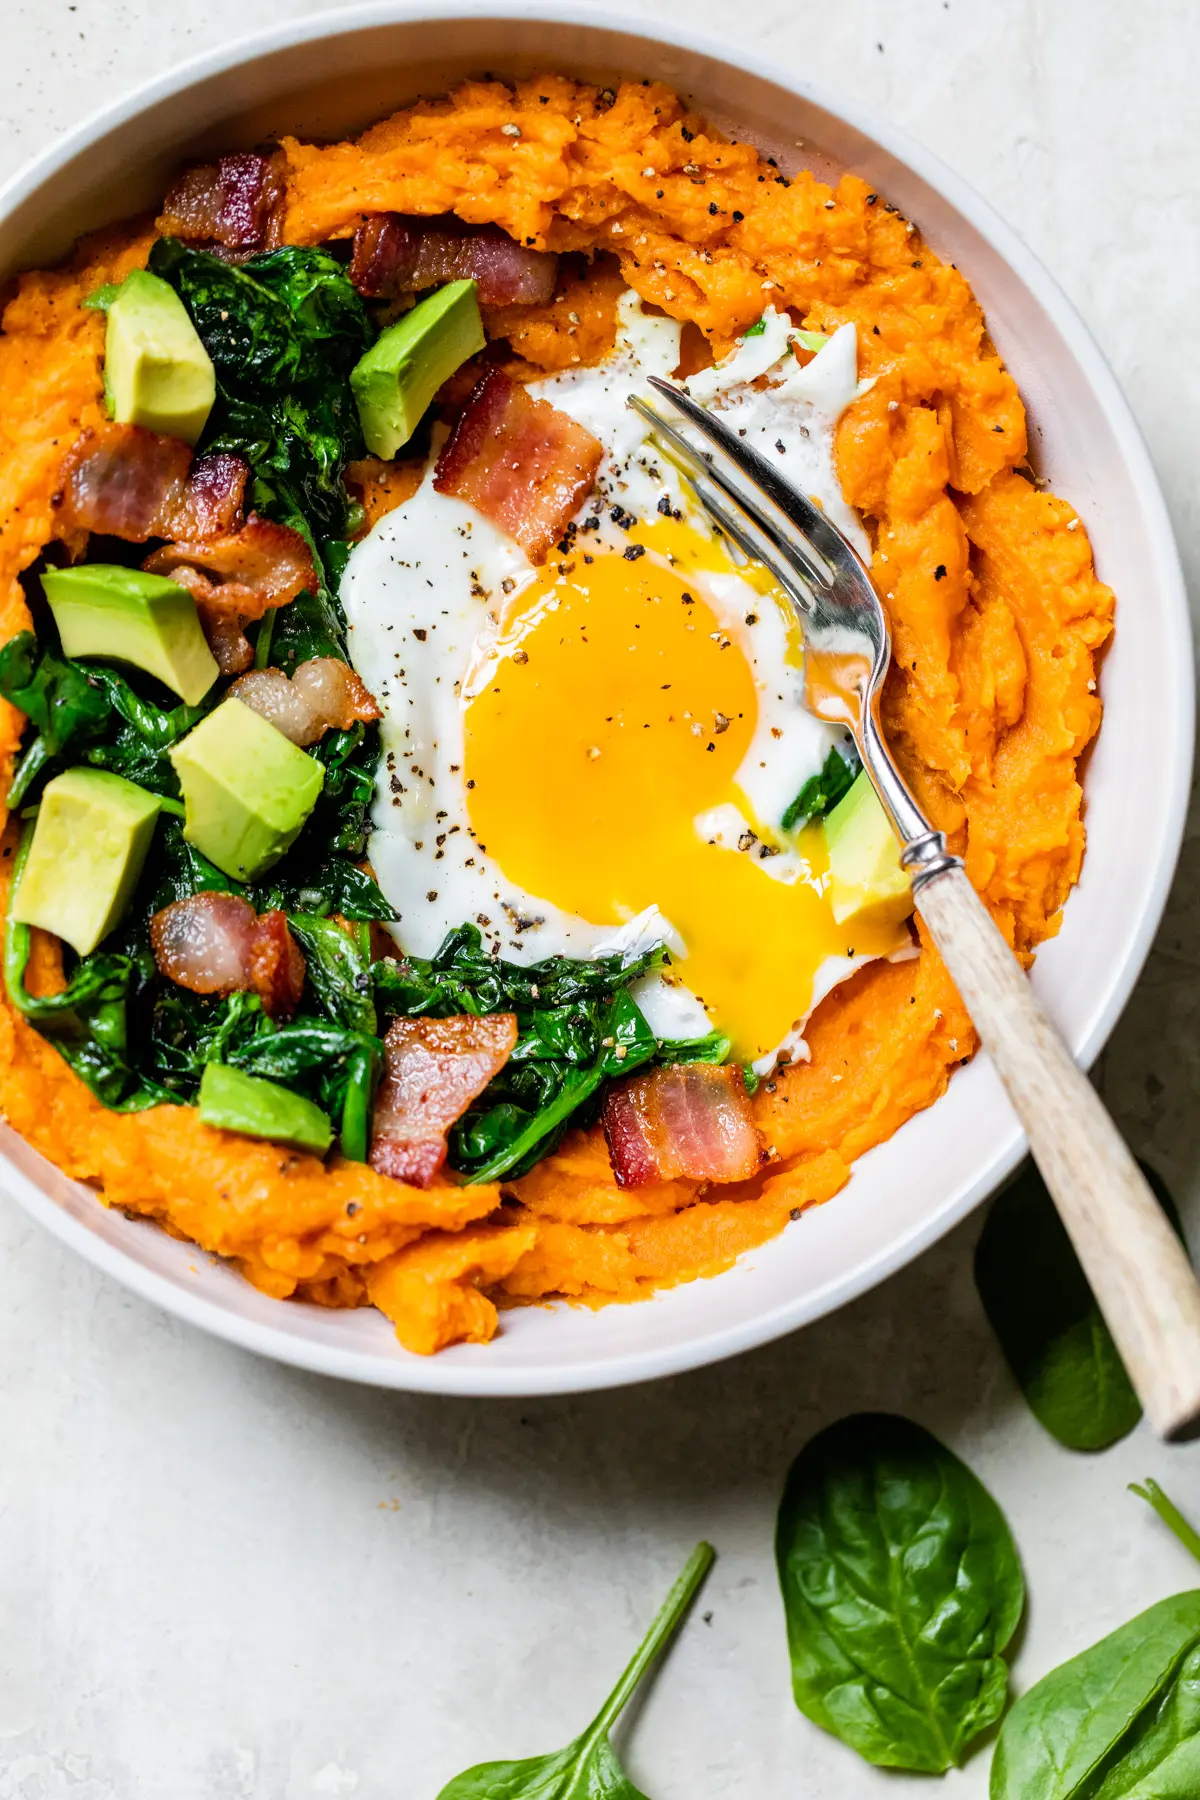 mashed sweet potatoes topped with spinach, bacon and a fried egg